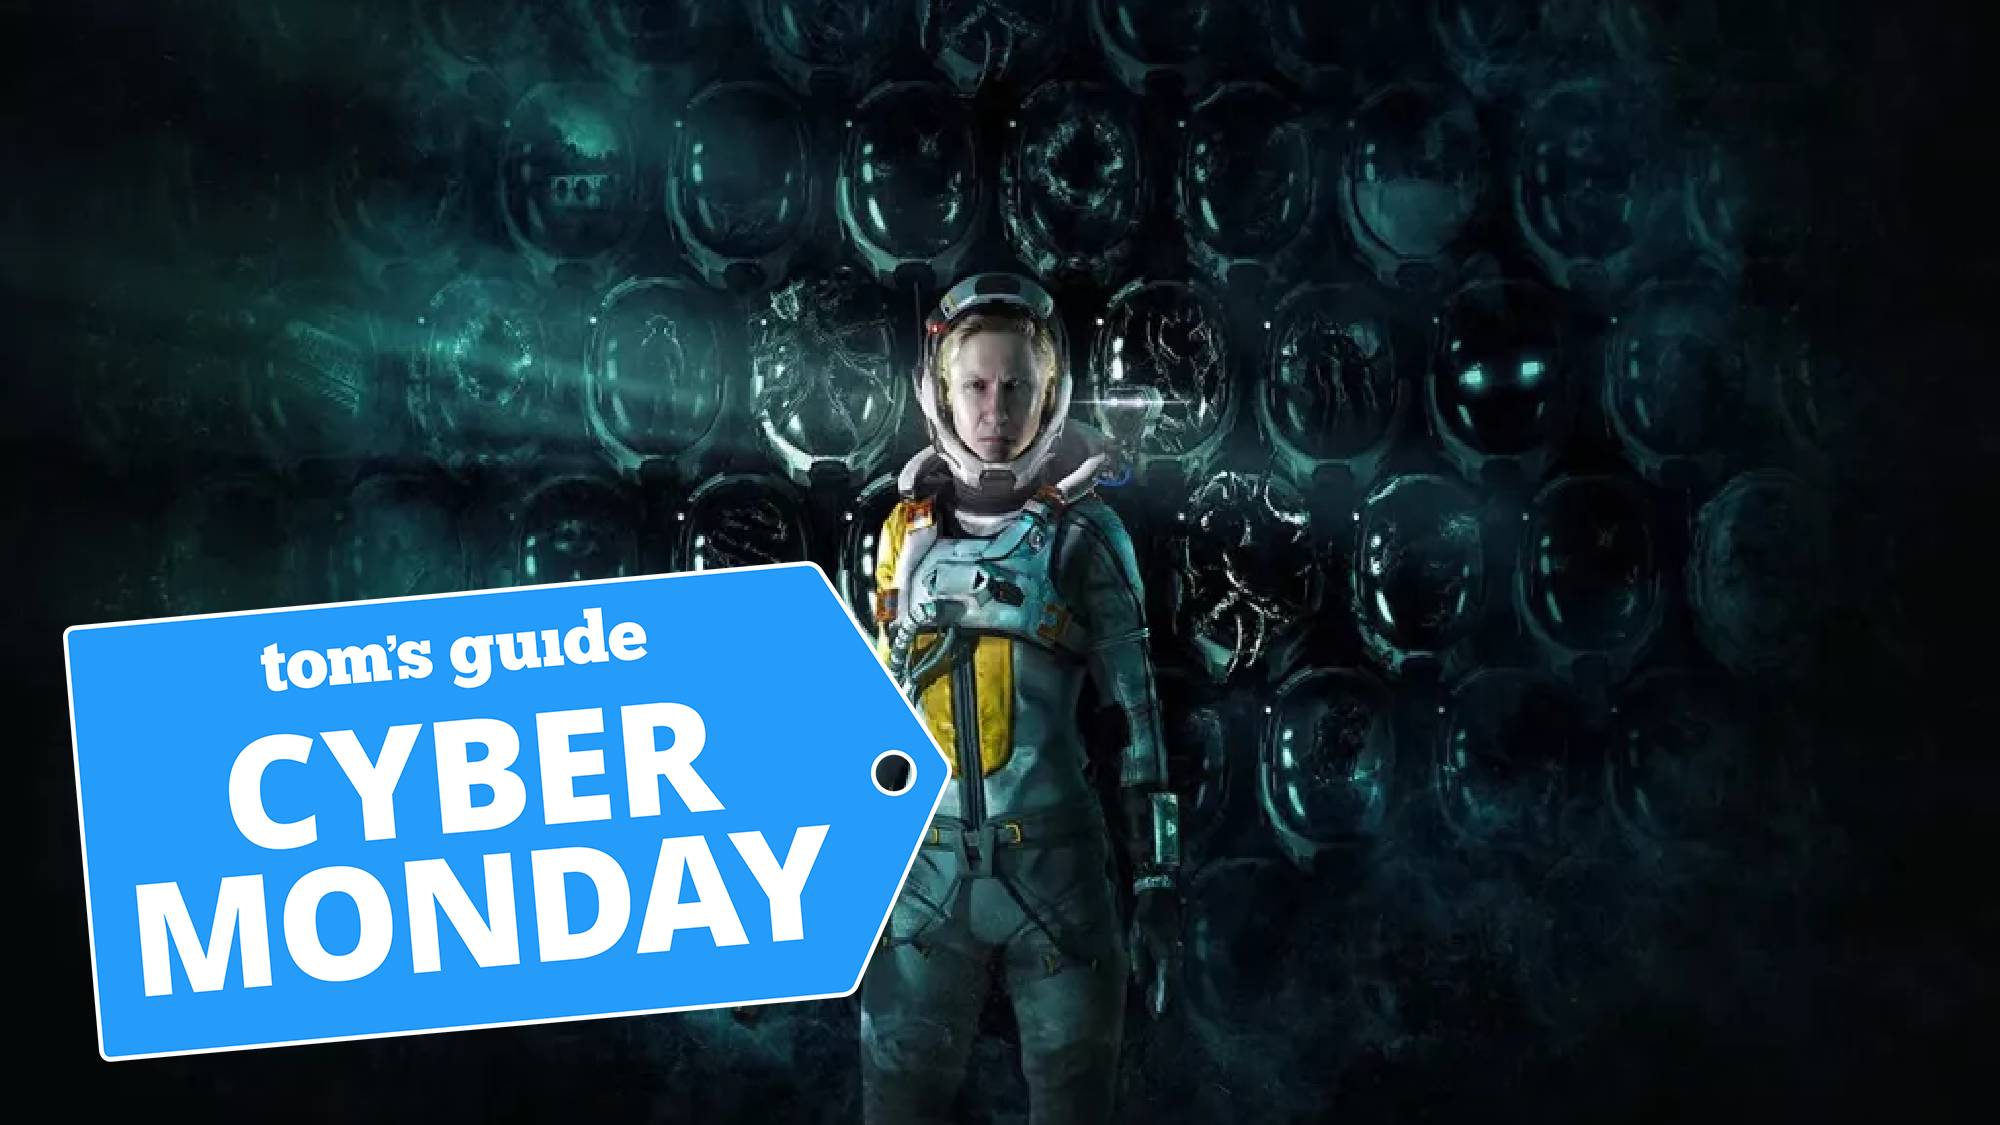 Return screening with Cyber ​​Monday tag